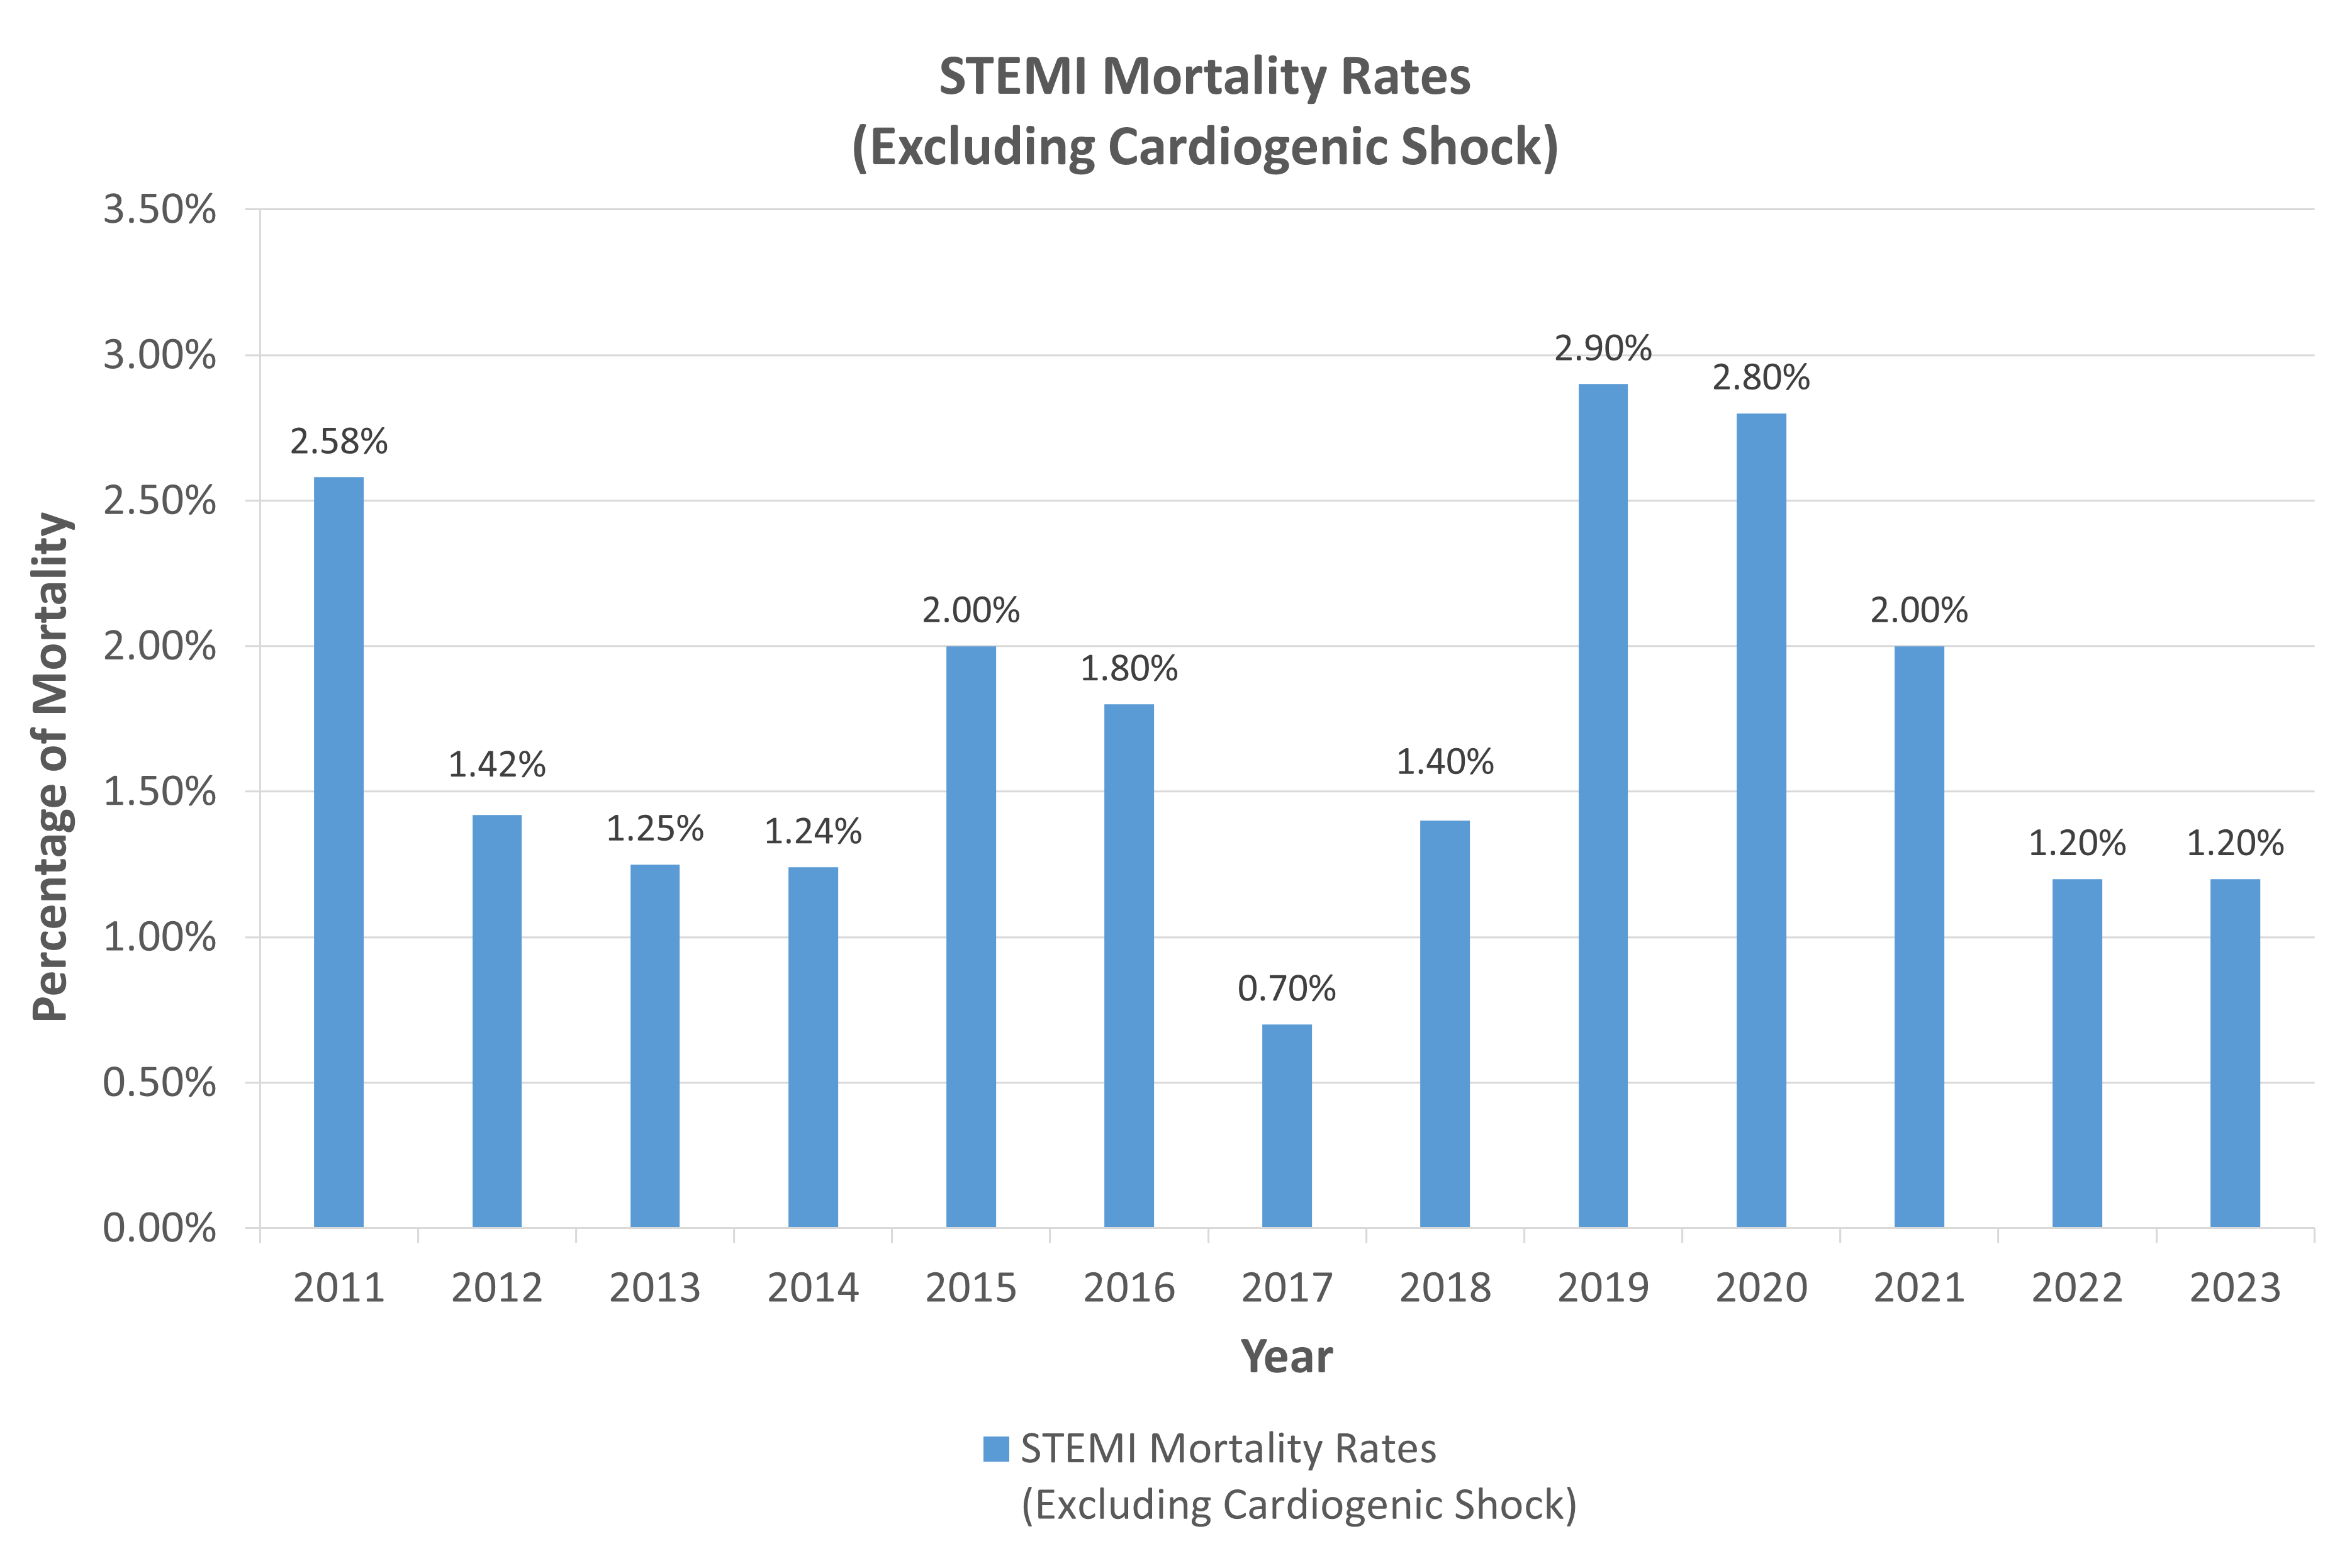 STEMI Mortality Rates (excl. Cardiogenic Shock)_Updated 7 June.jpg